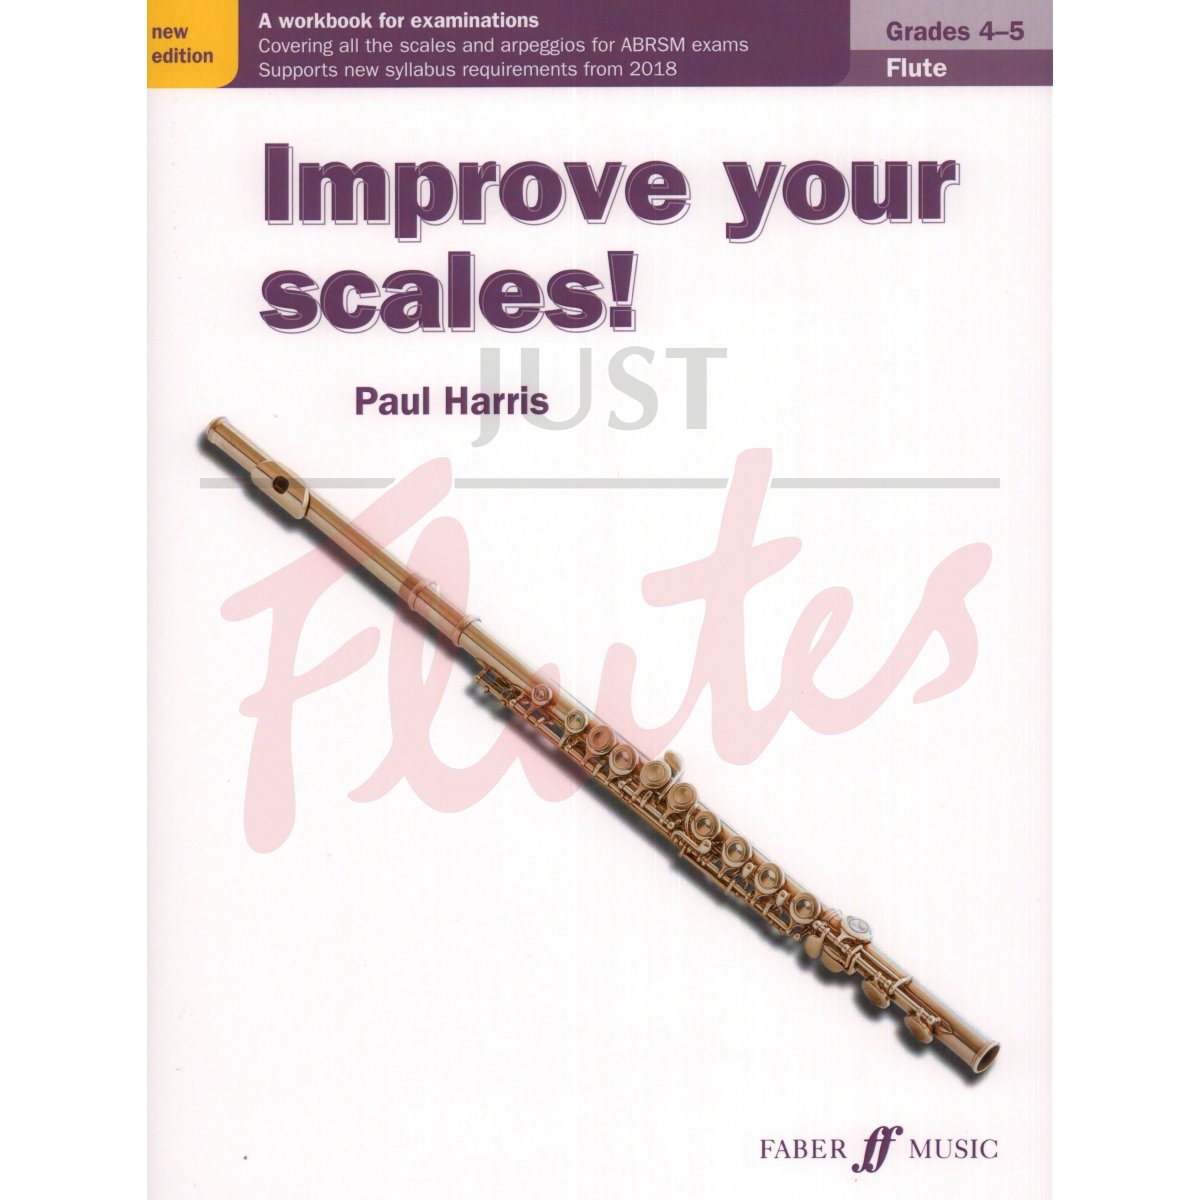 Improve Your Scales! [Flute] Grades 4-5 (from 2018)